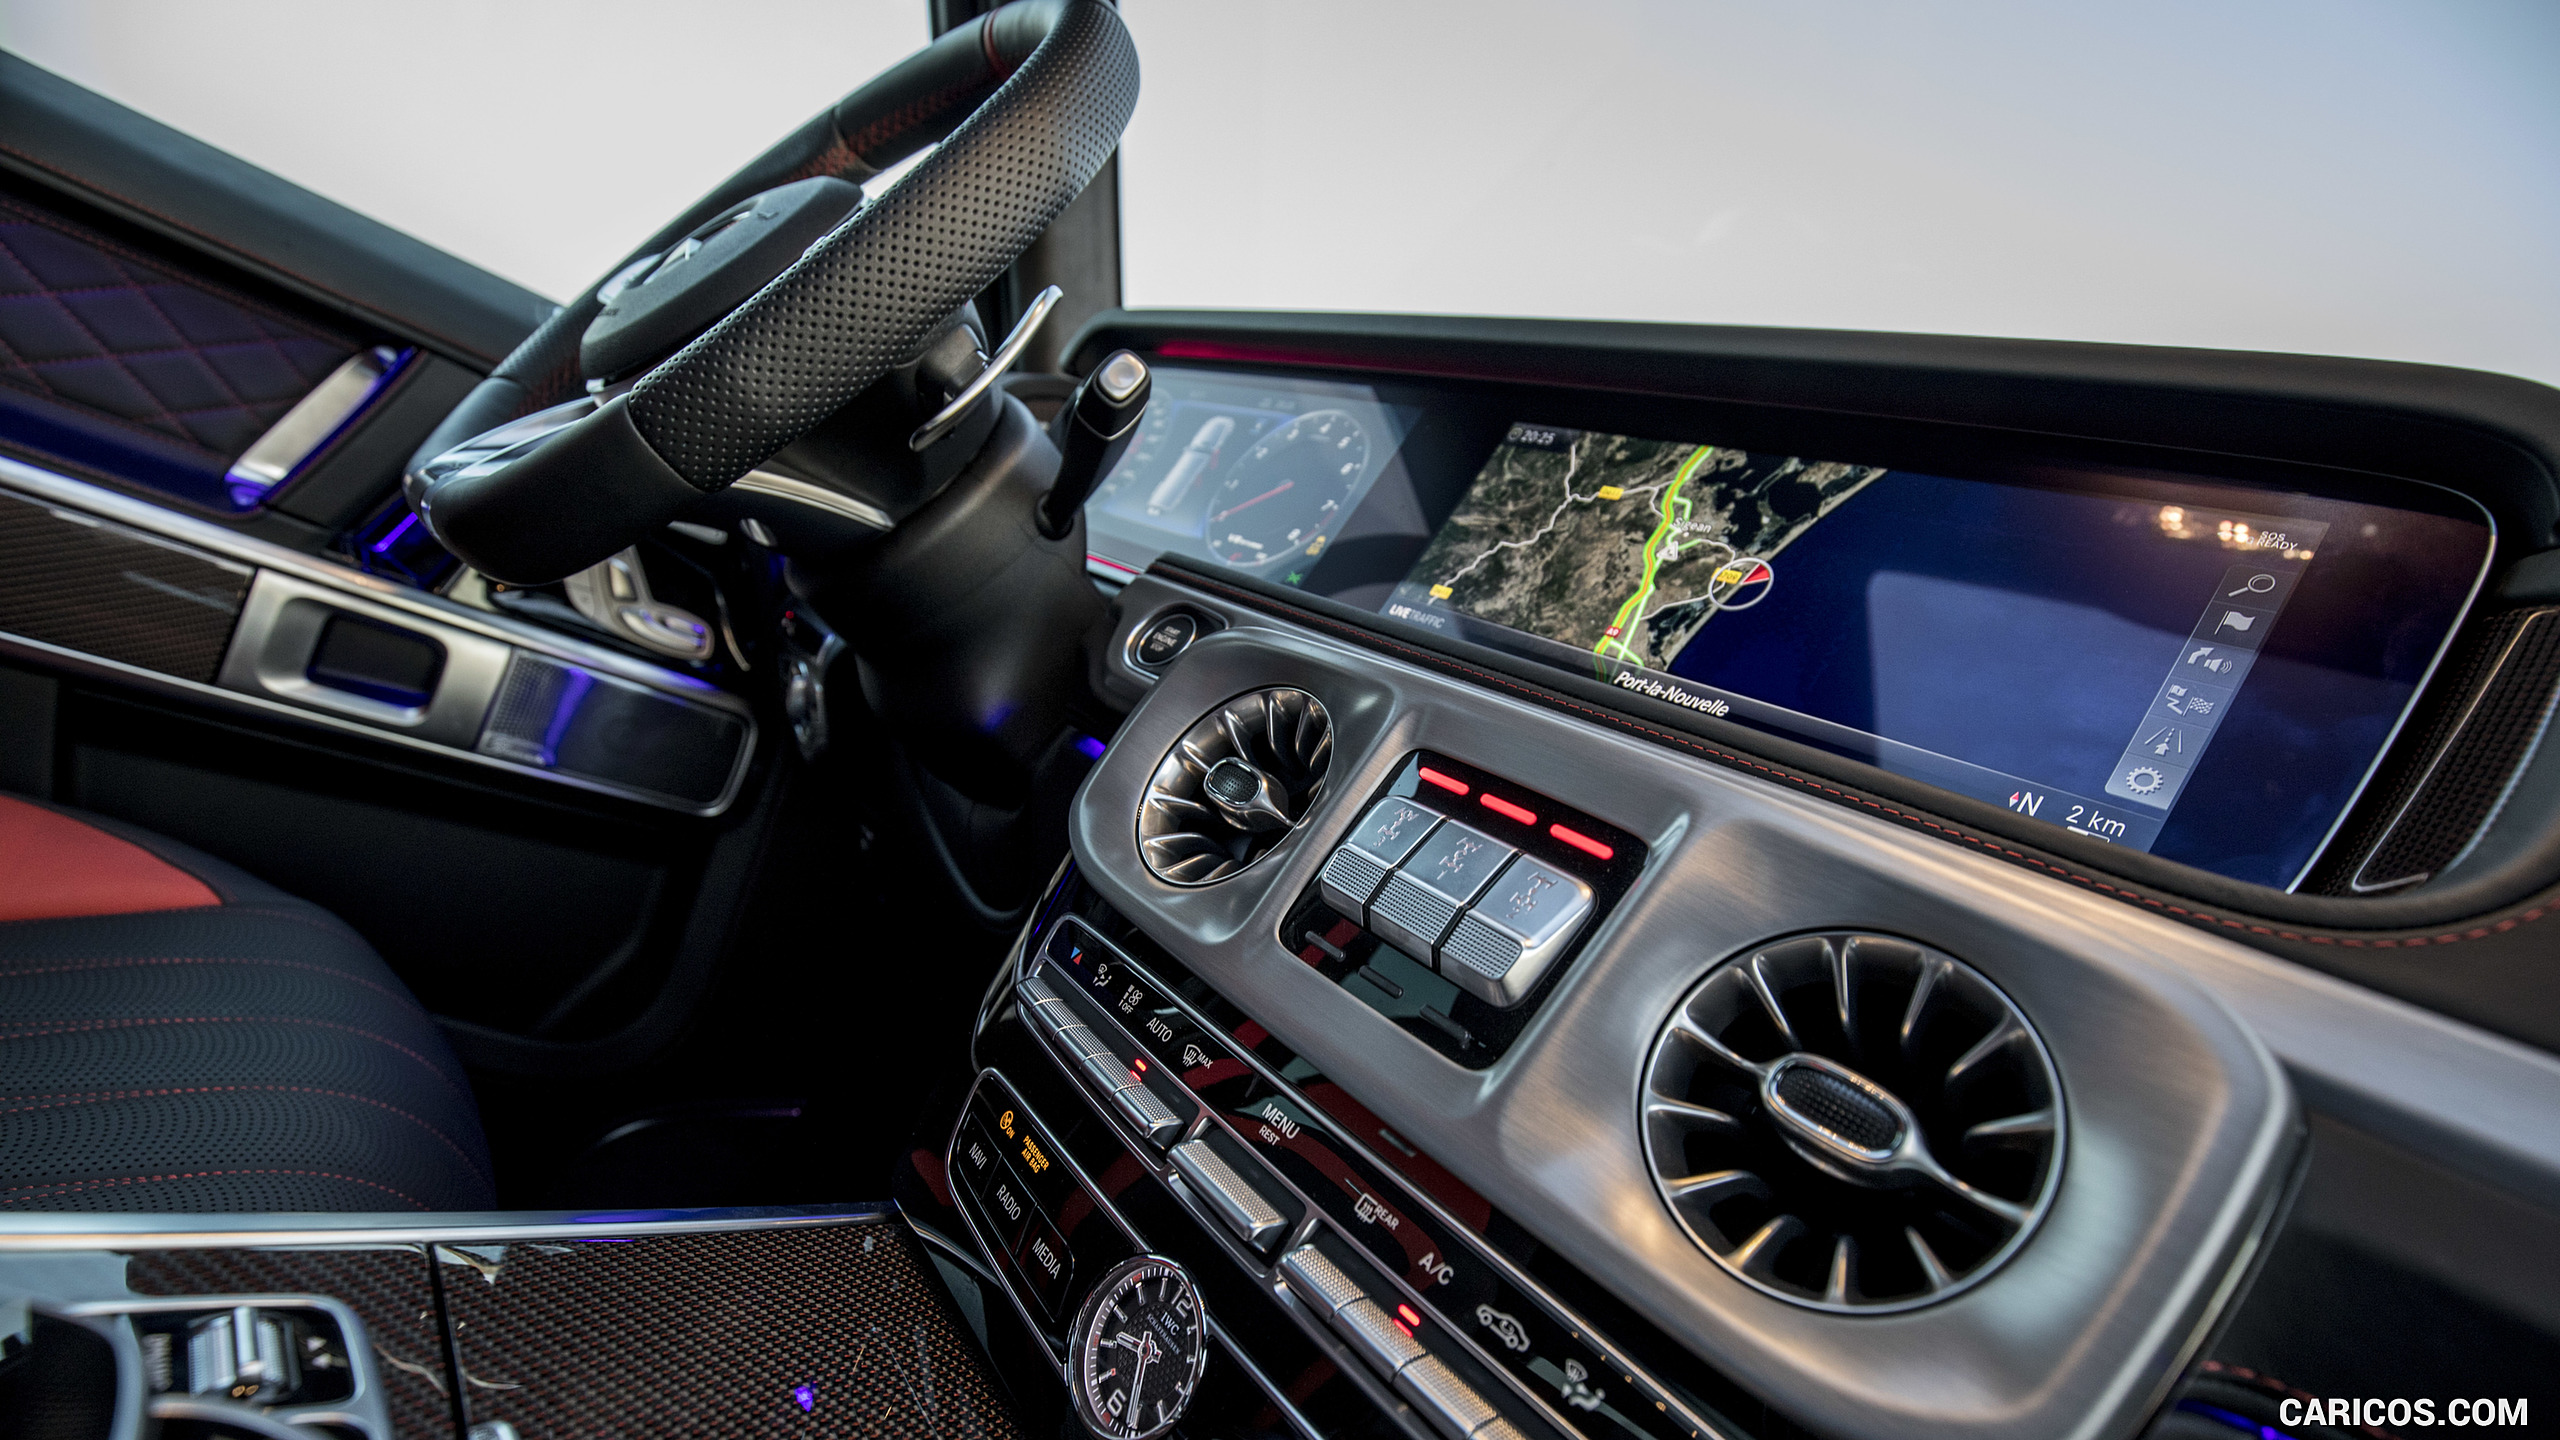 2019 Mercedes-AMG G63 - Central Console, #196 of 452